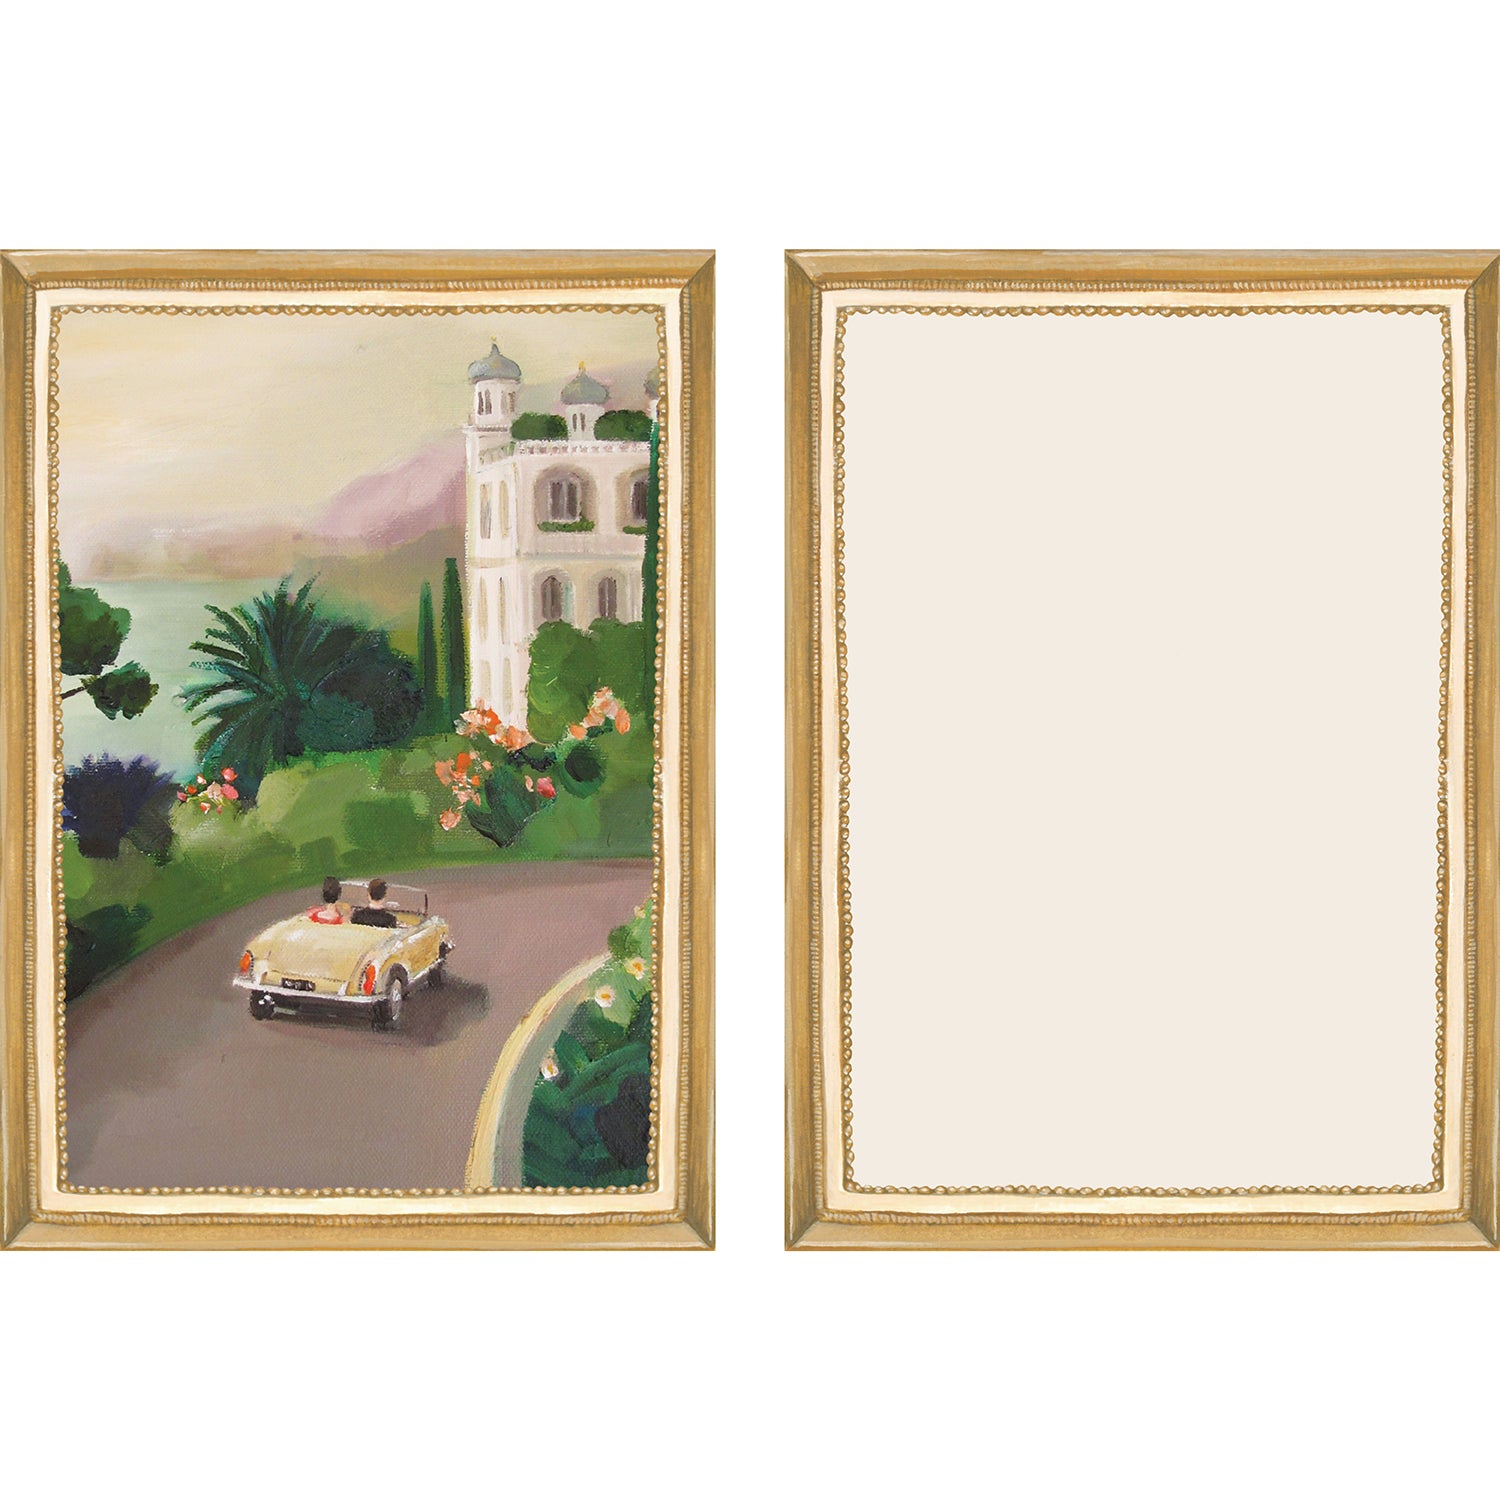 The illustrated front and blank back of a Flat Note, both sides framed in gold, featuring a painterly illustration of a man and woman driving a vintage-style car through a lush countryside with a tall white estate in the distance.